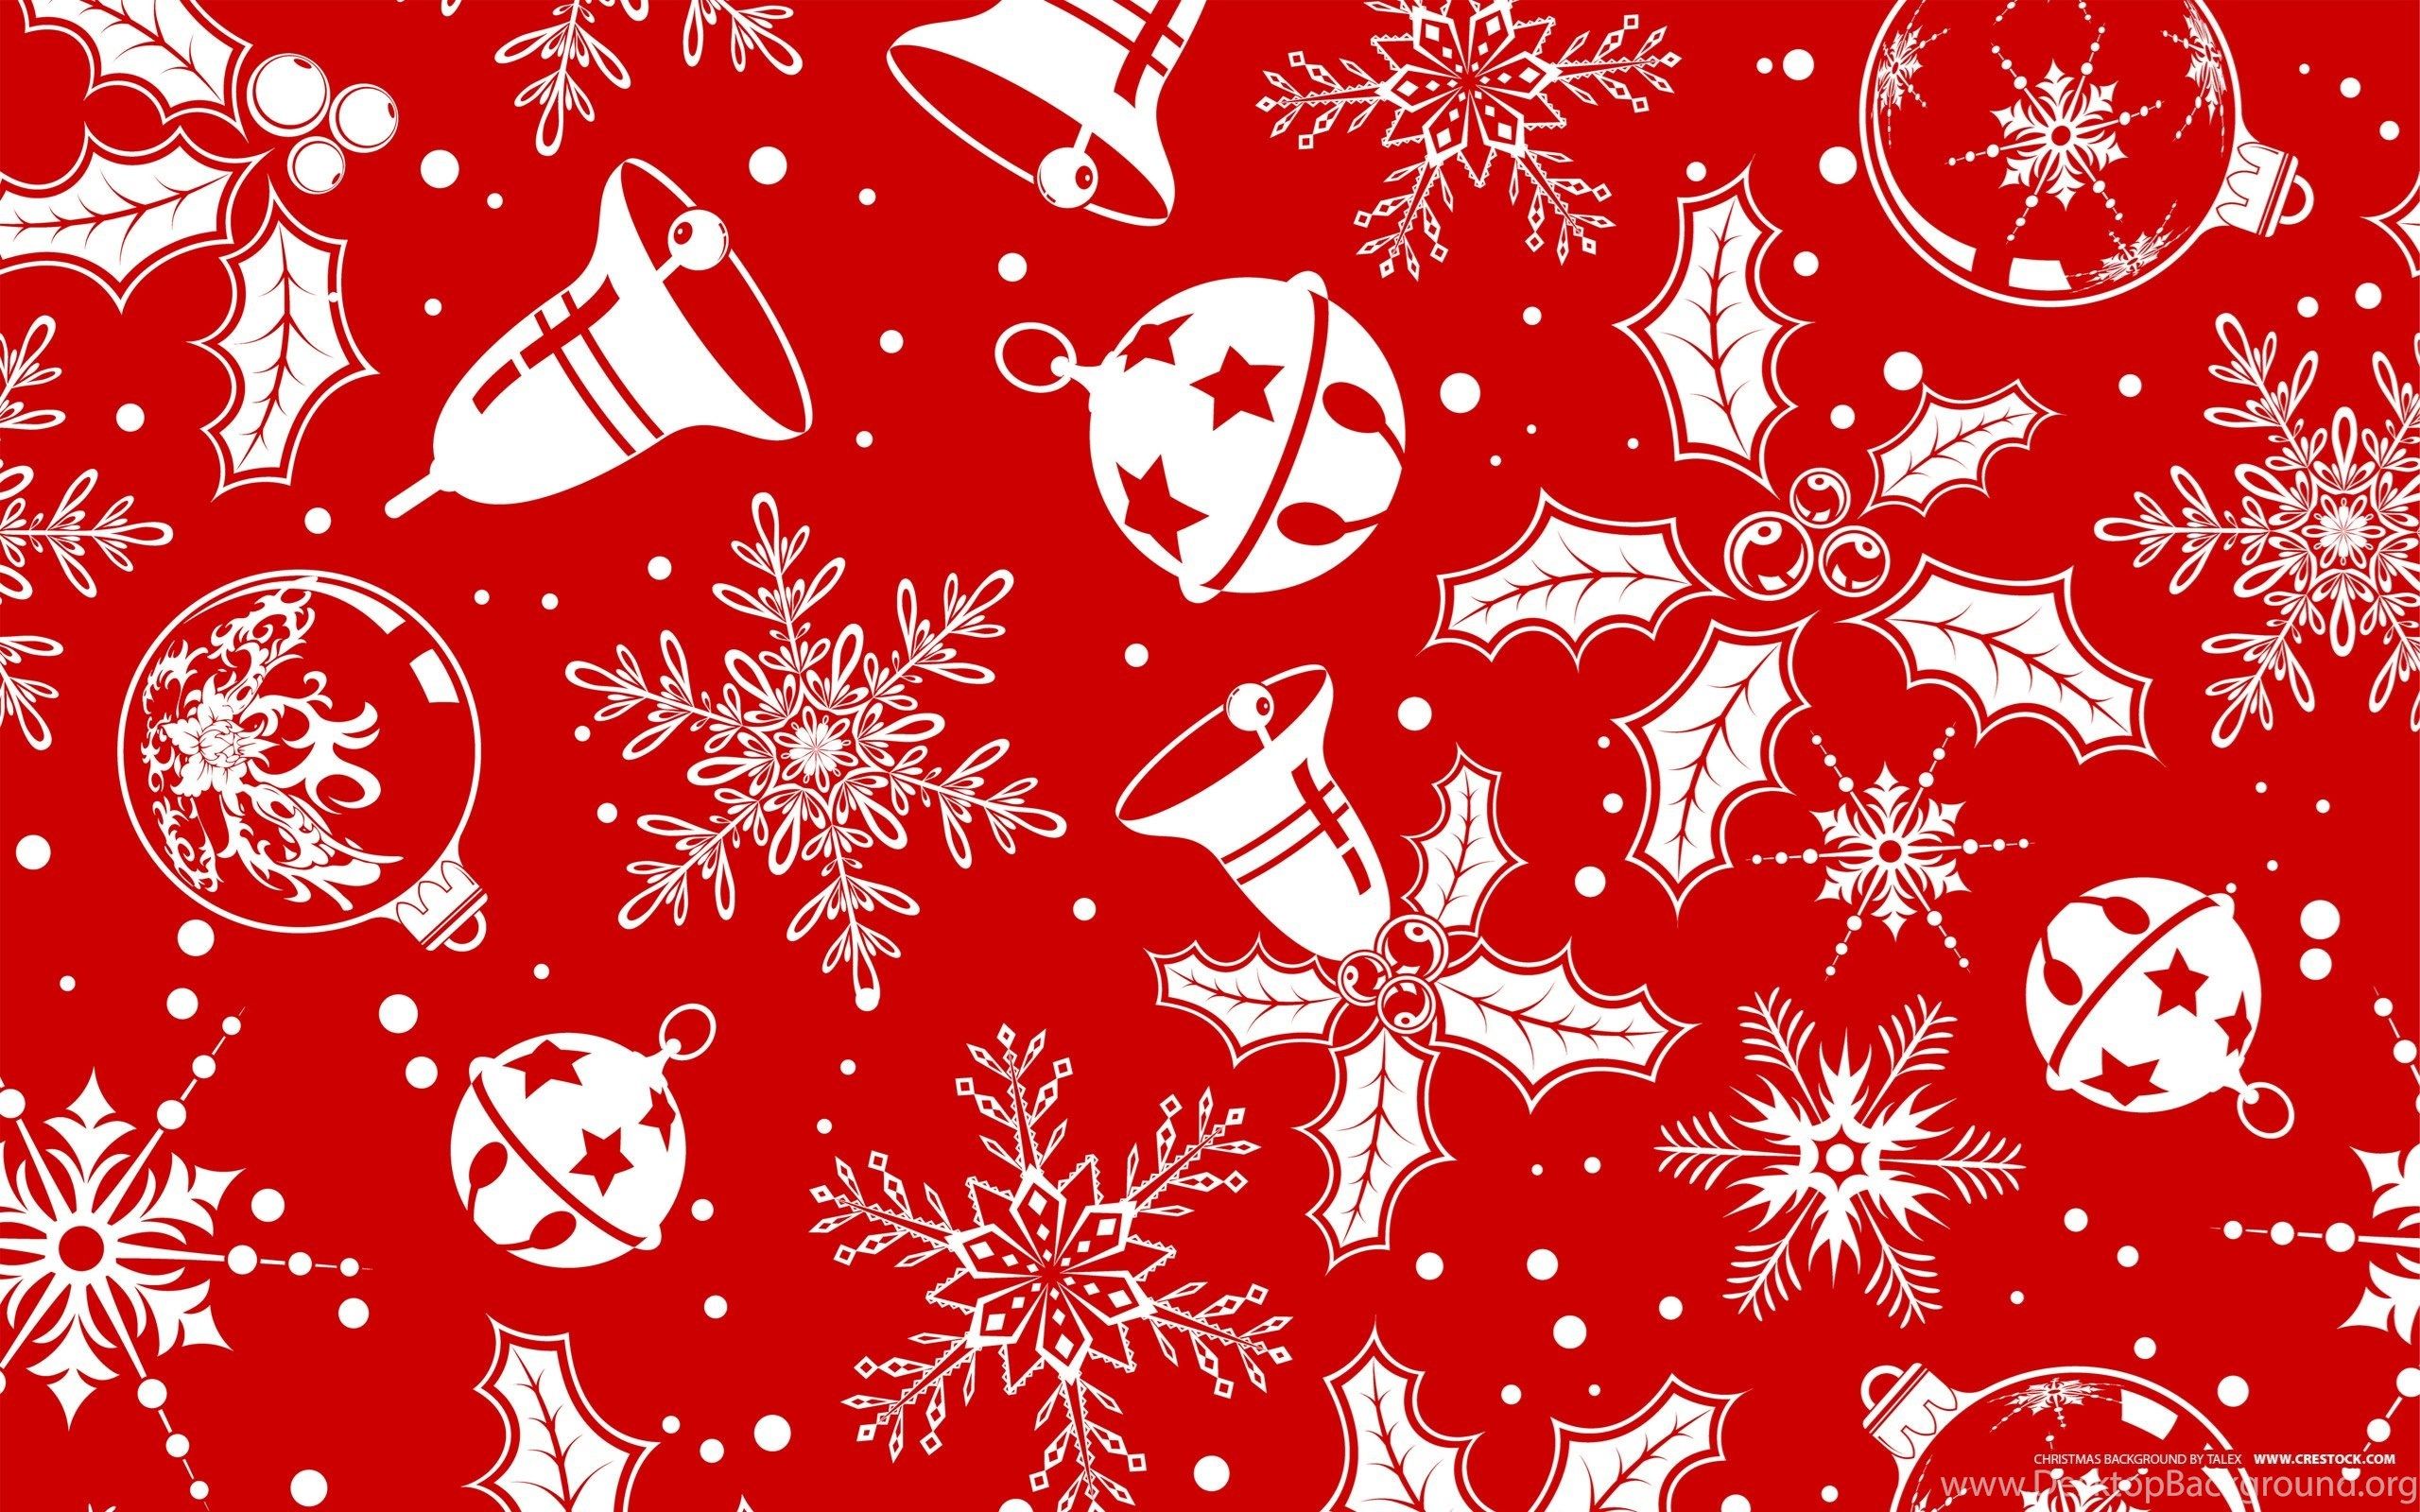 Christmas Wallpaper Simple Awesome Fullwidehd.com Desktop Background